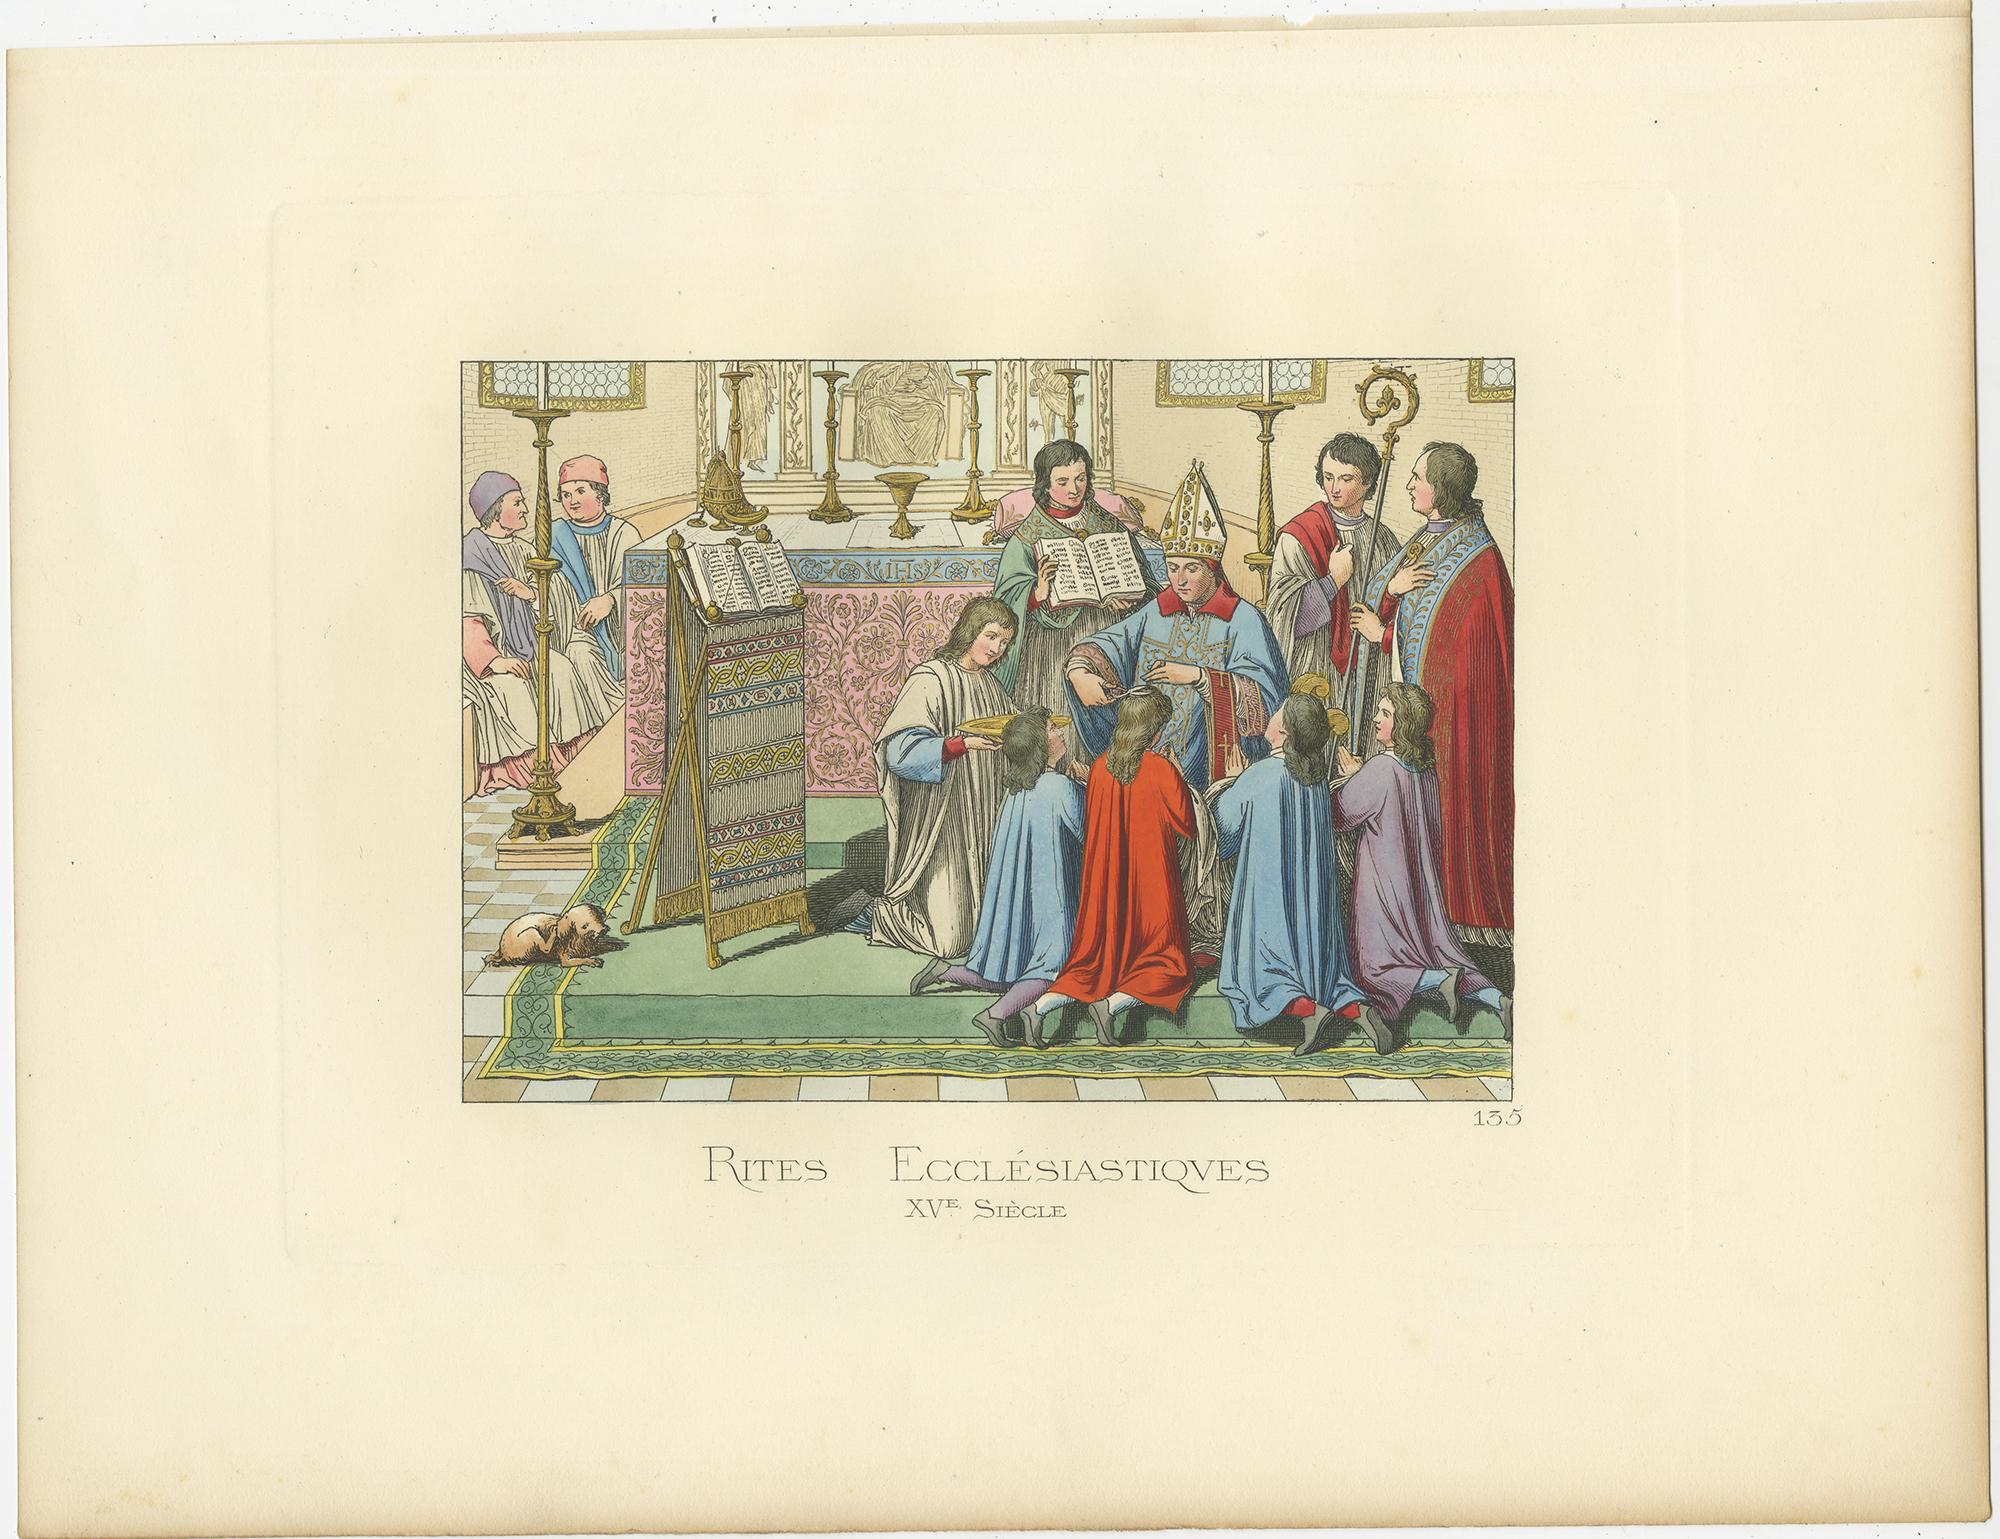 Paper Antique Print of Ecclesiastical Rites, 15th Century, by Bonnard, 1860 For Sale